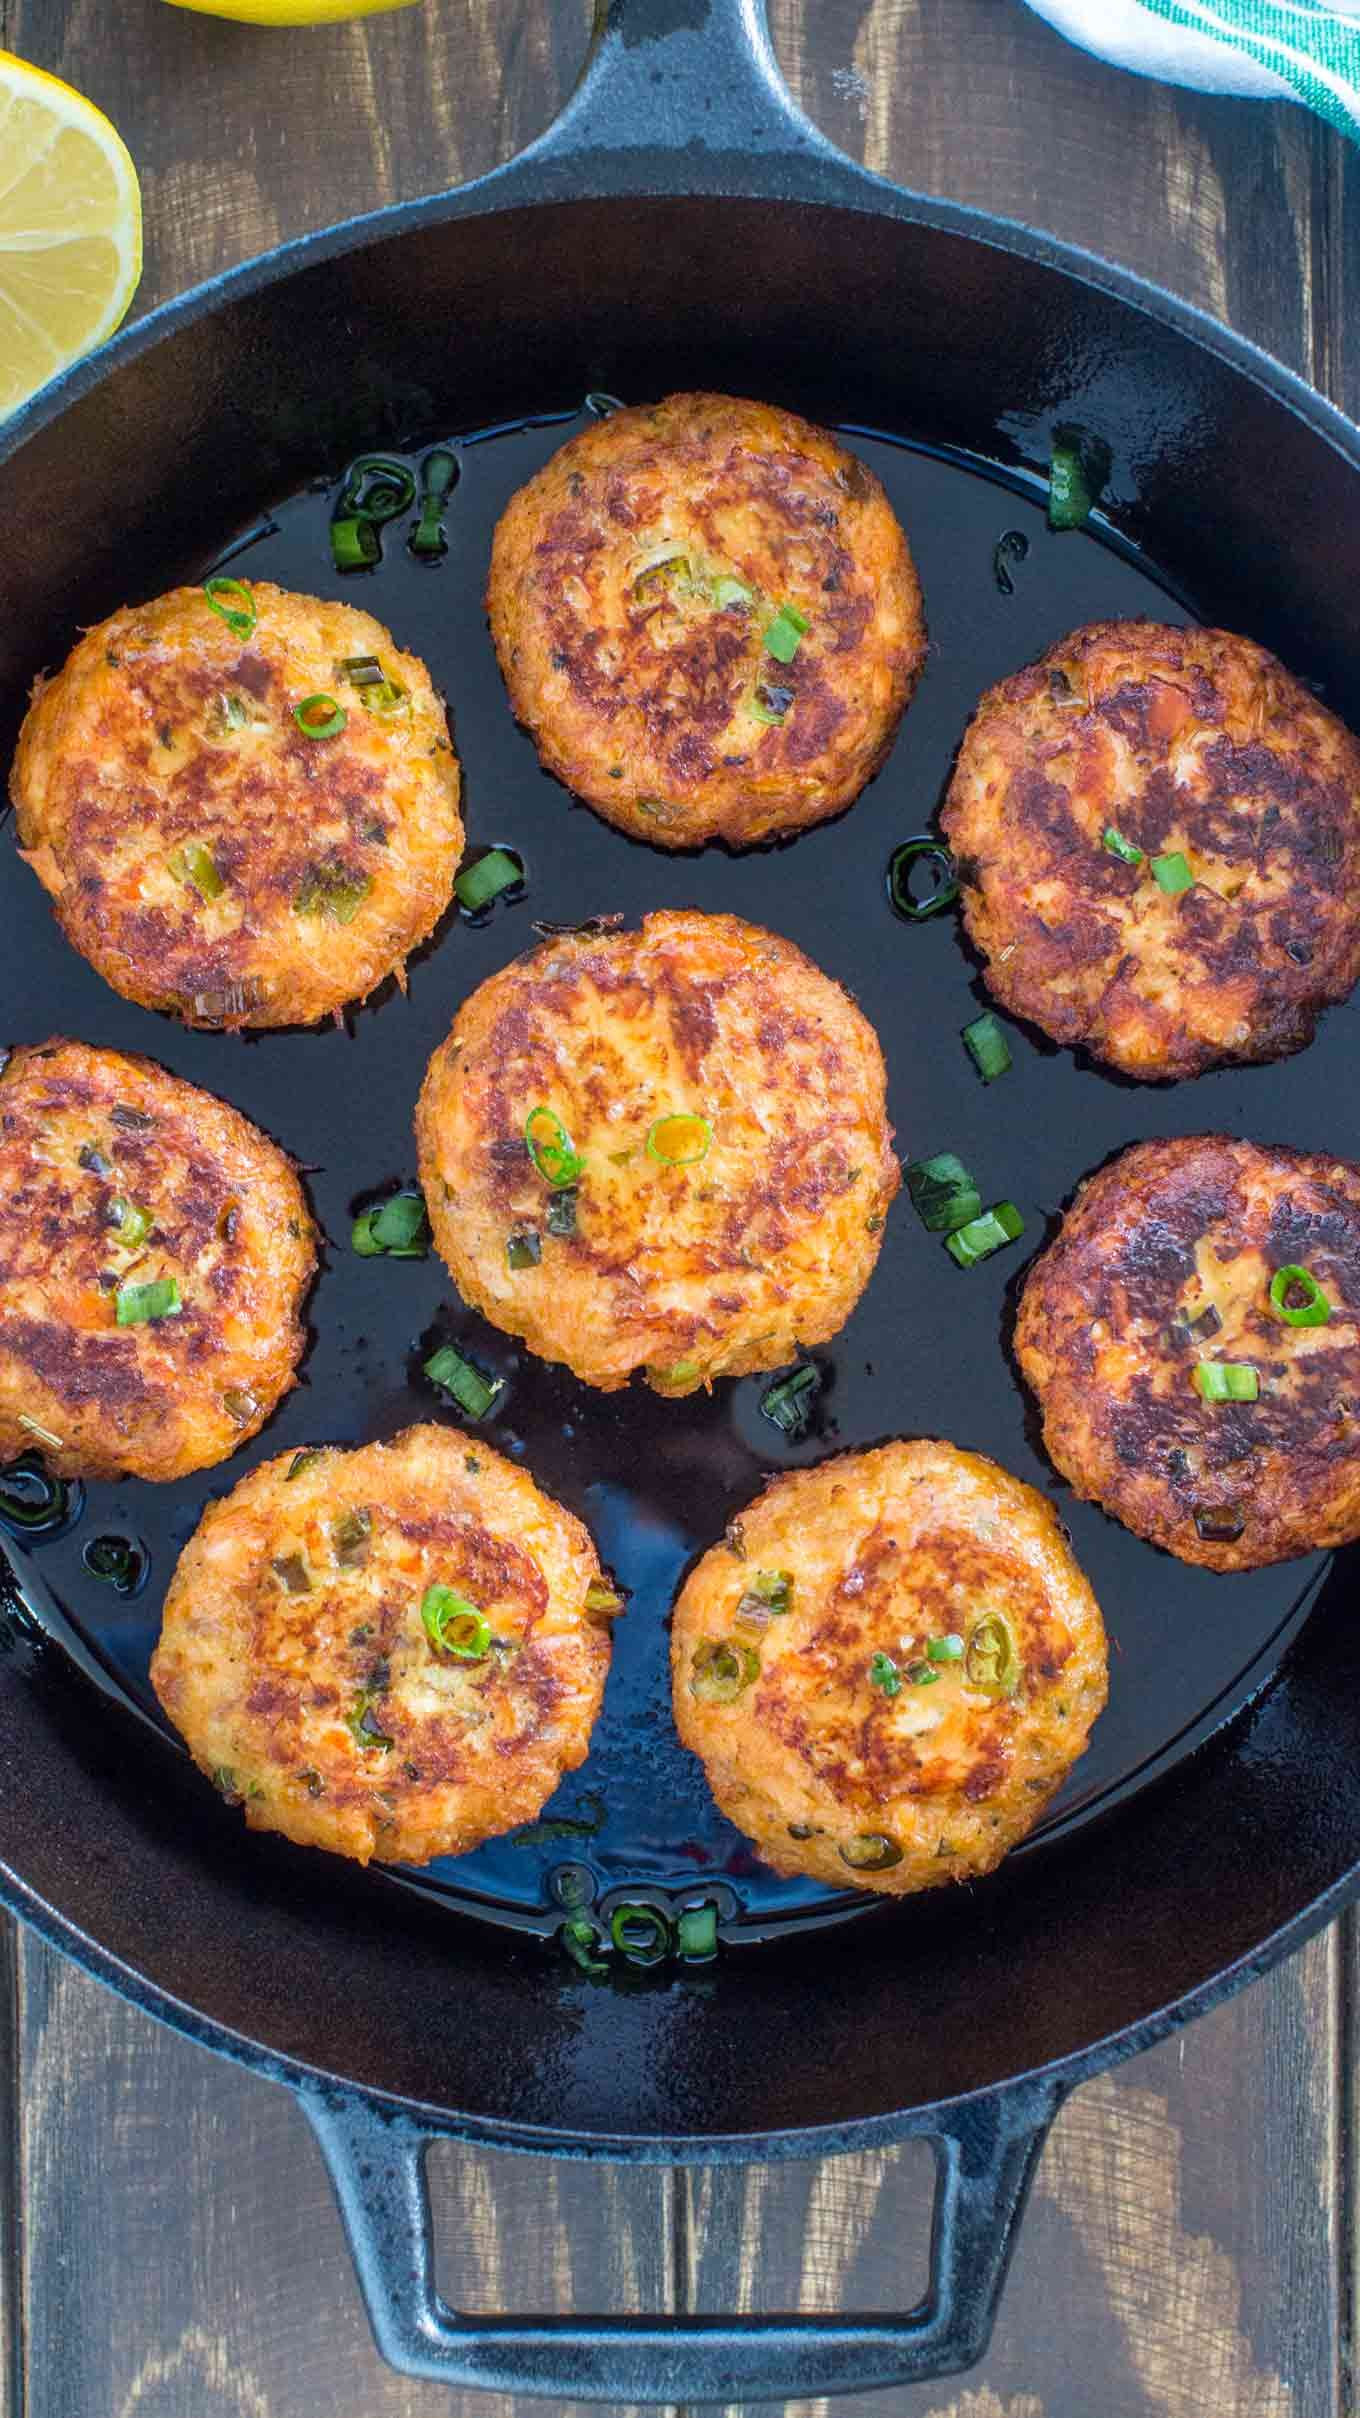 Salmon Patties With Bread Crumbs
 Salmon Patties are delicious and flavorful made with